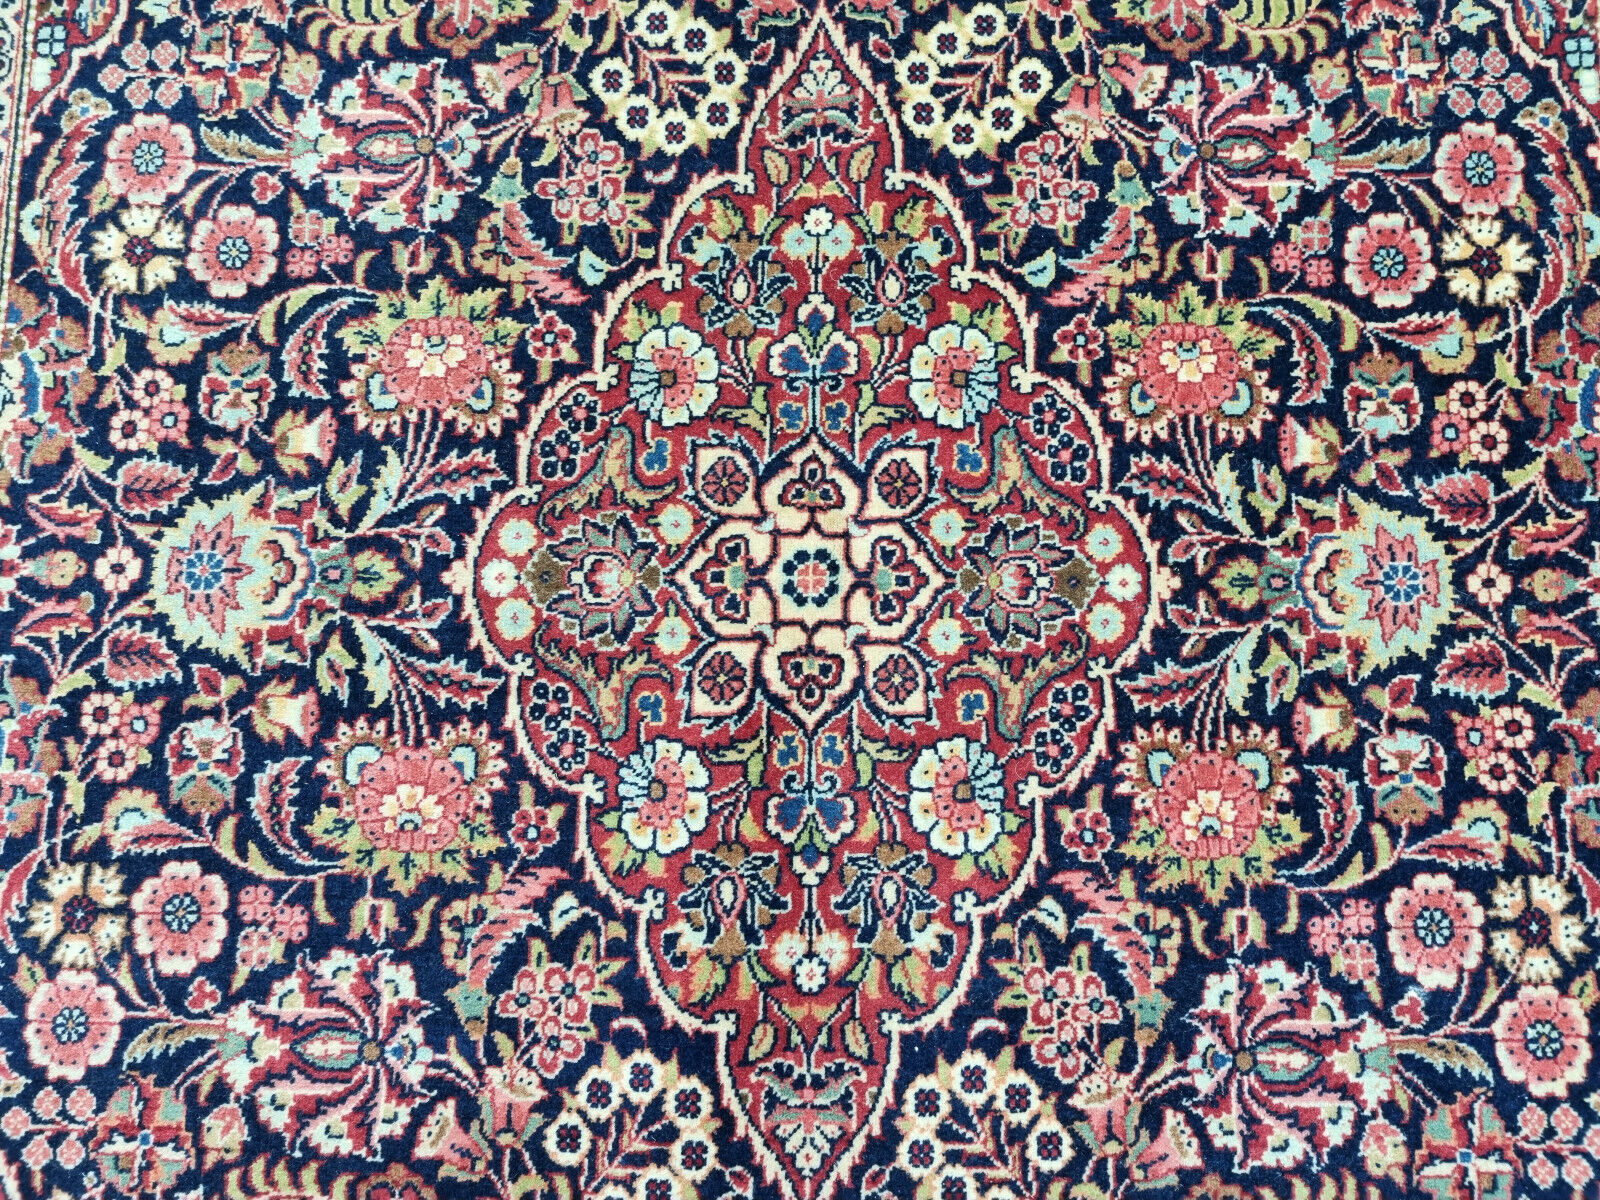 Close-up of dark base color on Handmade Antique Persian Kashan Rug - Detailed view emphasizing the dark base color of the rug's pattern.